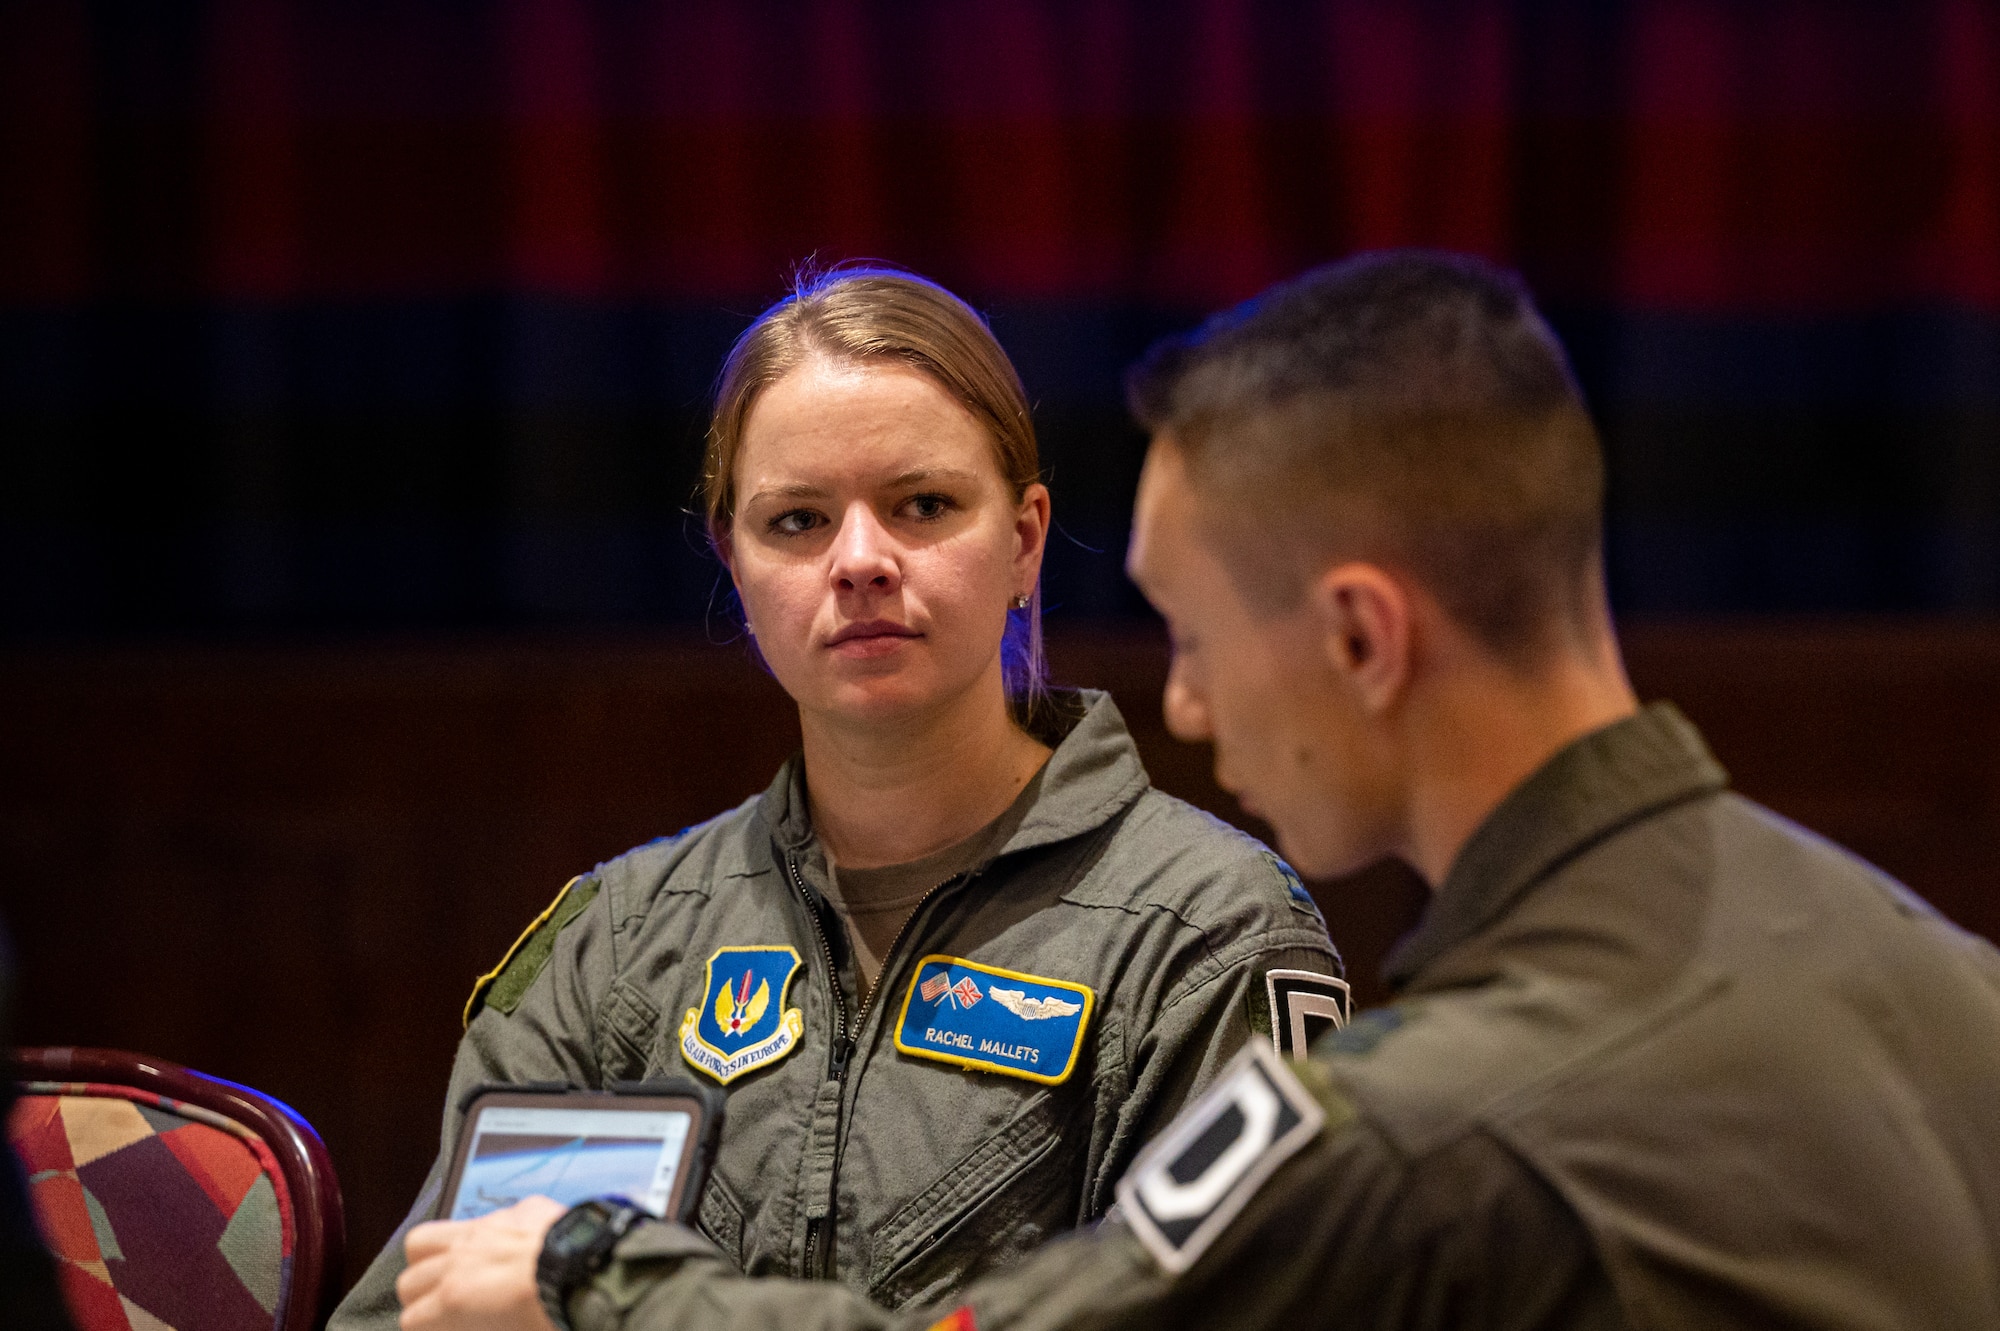 U.S. Air Force Capt. Rachel Mallets, left, 100th Operations Support Squadron KC-135 Stratotanker pilot, and Capt. Anthony Vecchio, right, 100th OSS KC-135 Stratotanker pilot, speak to NATO allies about the capabilities of the KC-135 during the European Tanker Symposium at Royal Air Force Mildenhall, England, Nov. 16, 2023.